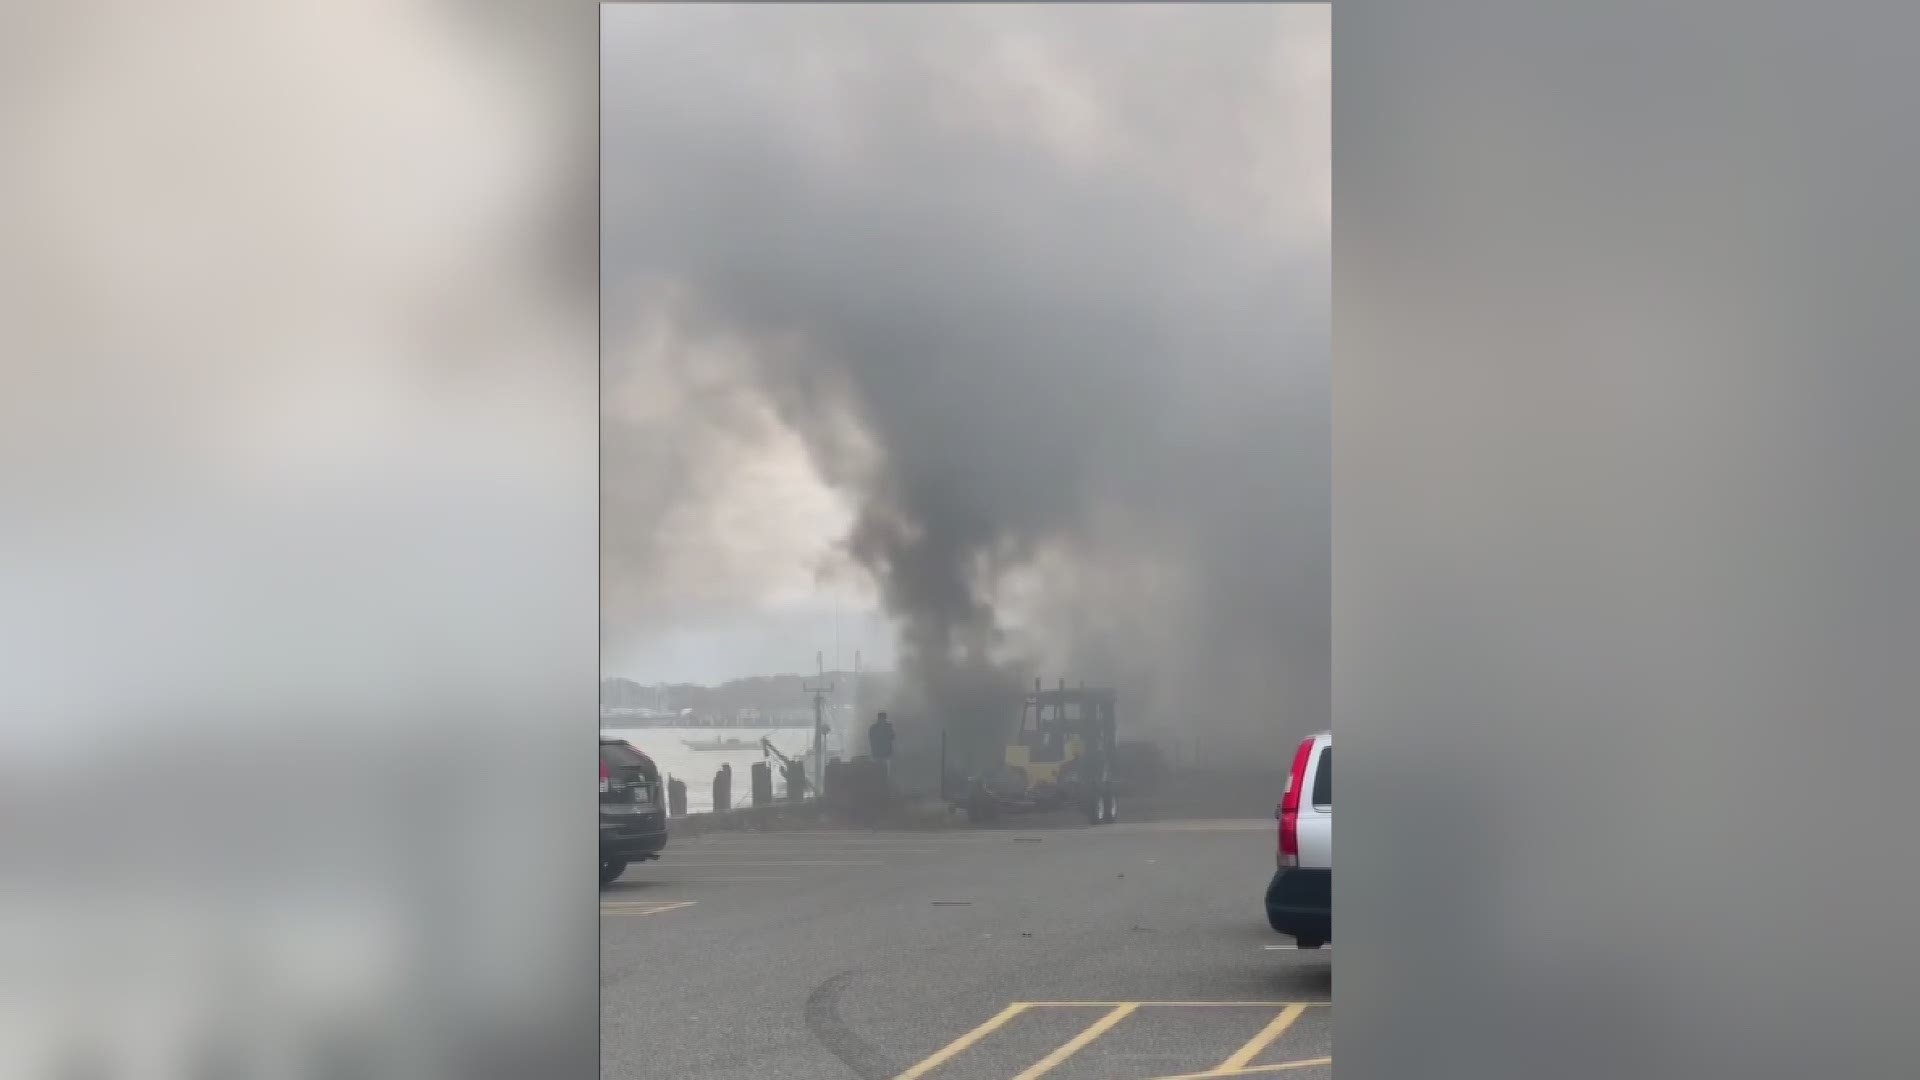 South Portland Fire Department shared a video of the fire at the Portland Pier Tuesday morning.